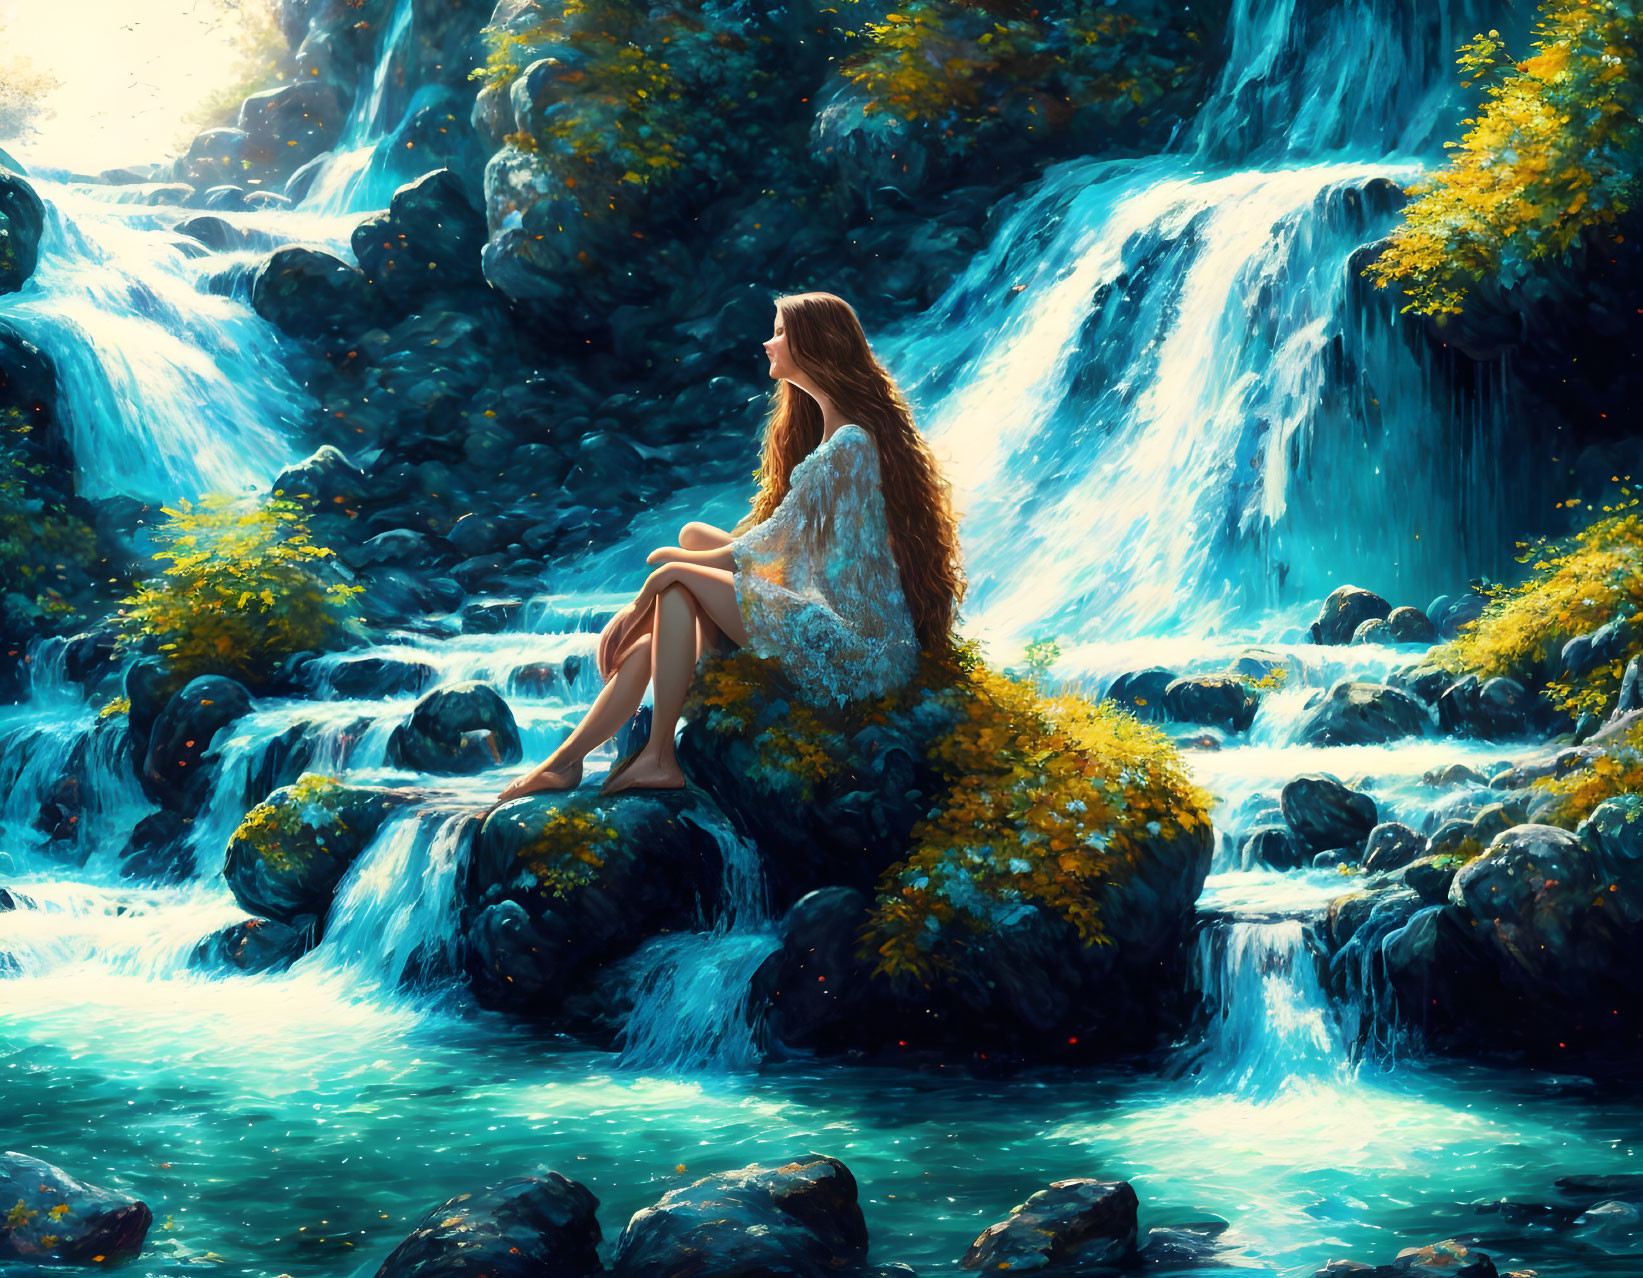 Woman in White Dress Sitting by Moss-Covered Rock Near Waterfall